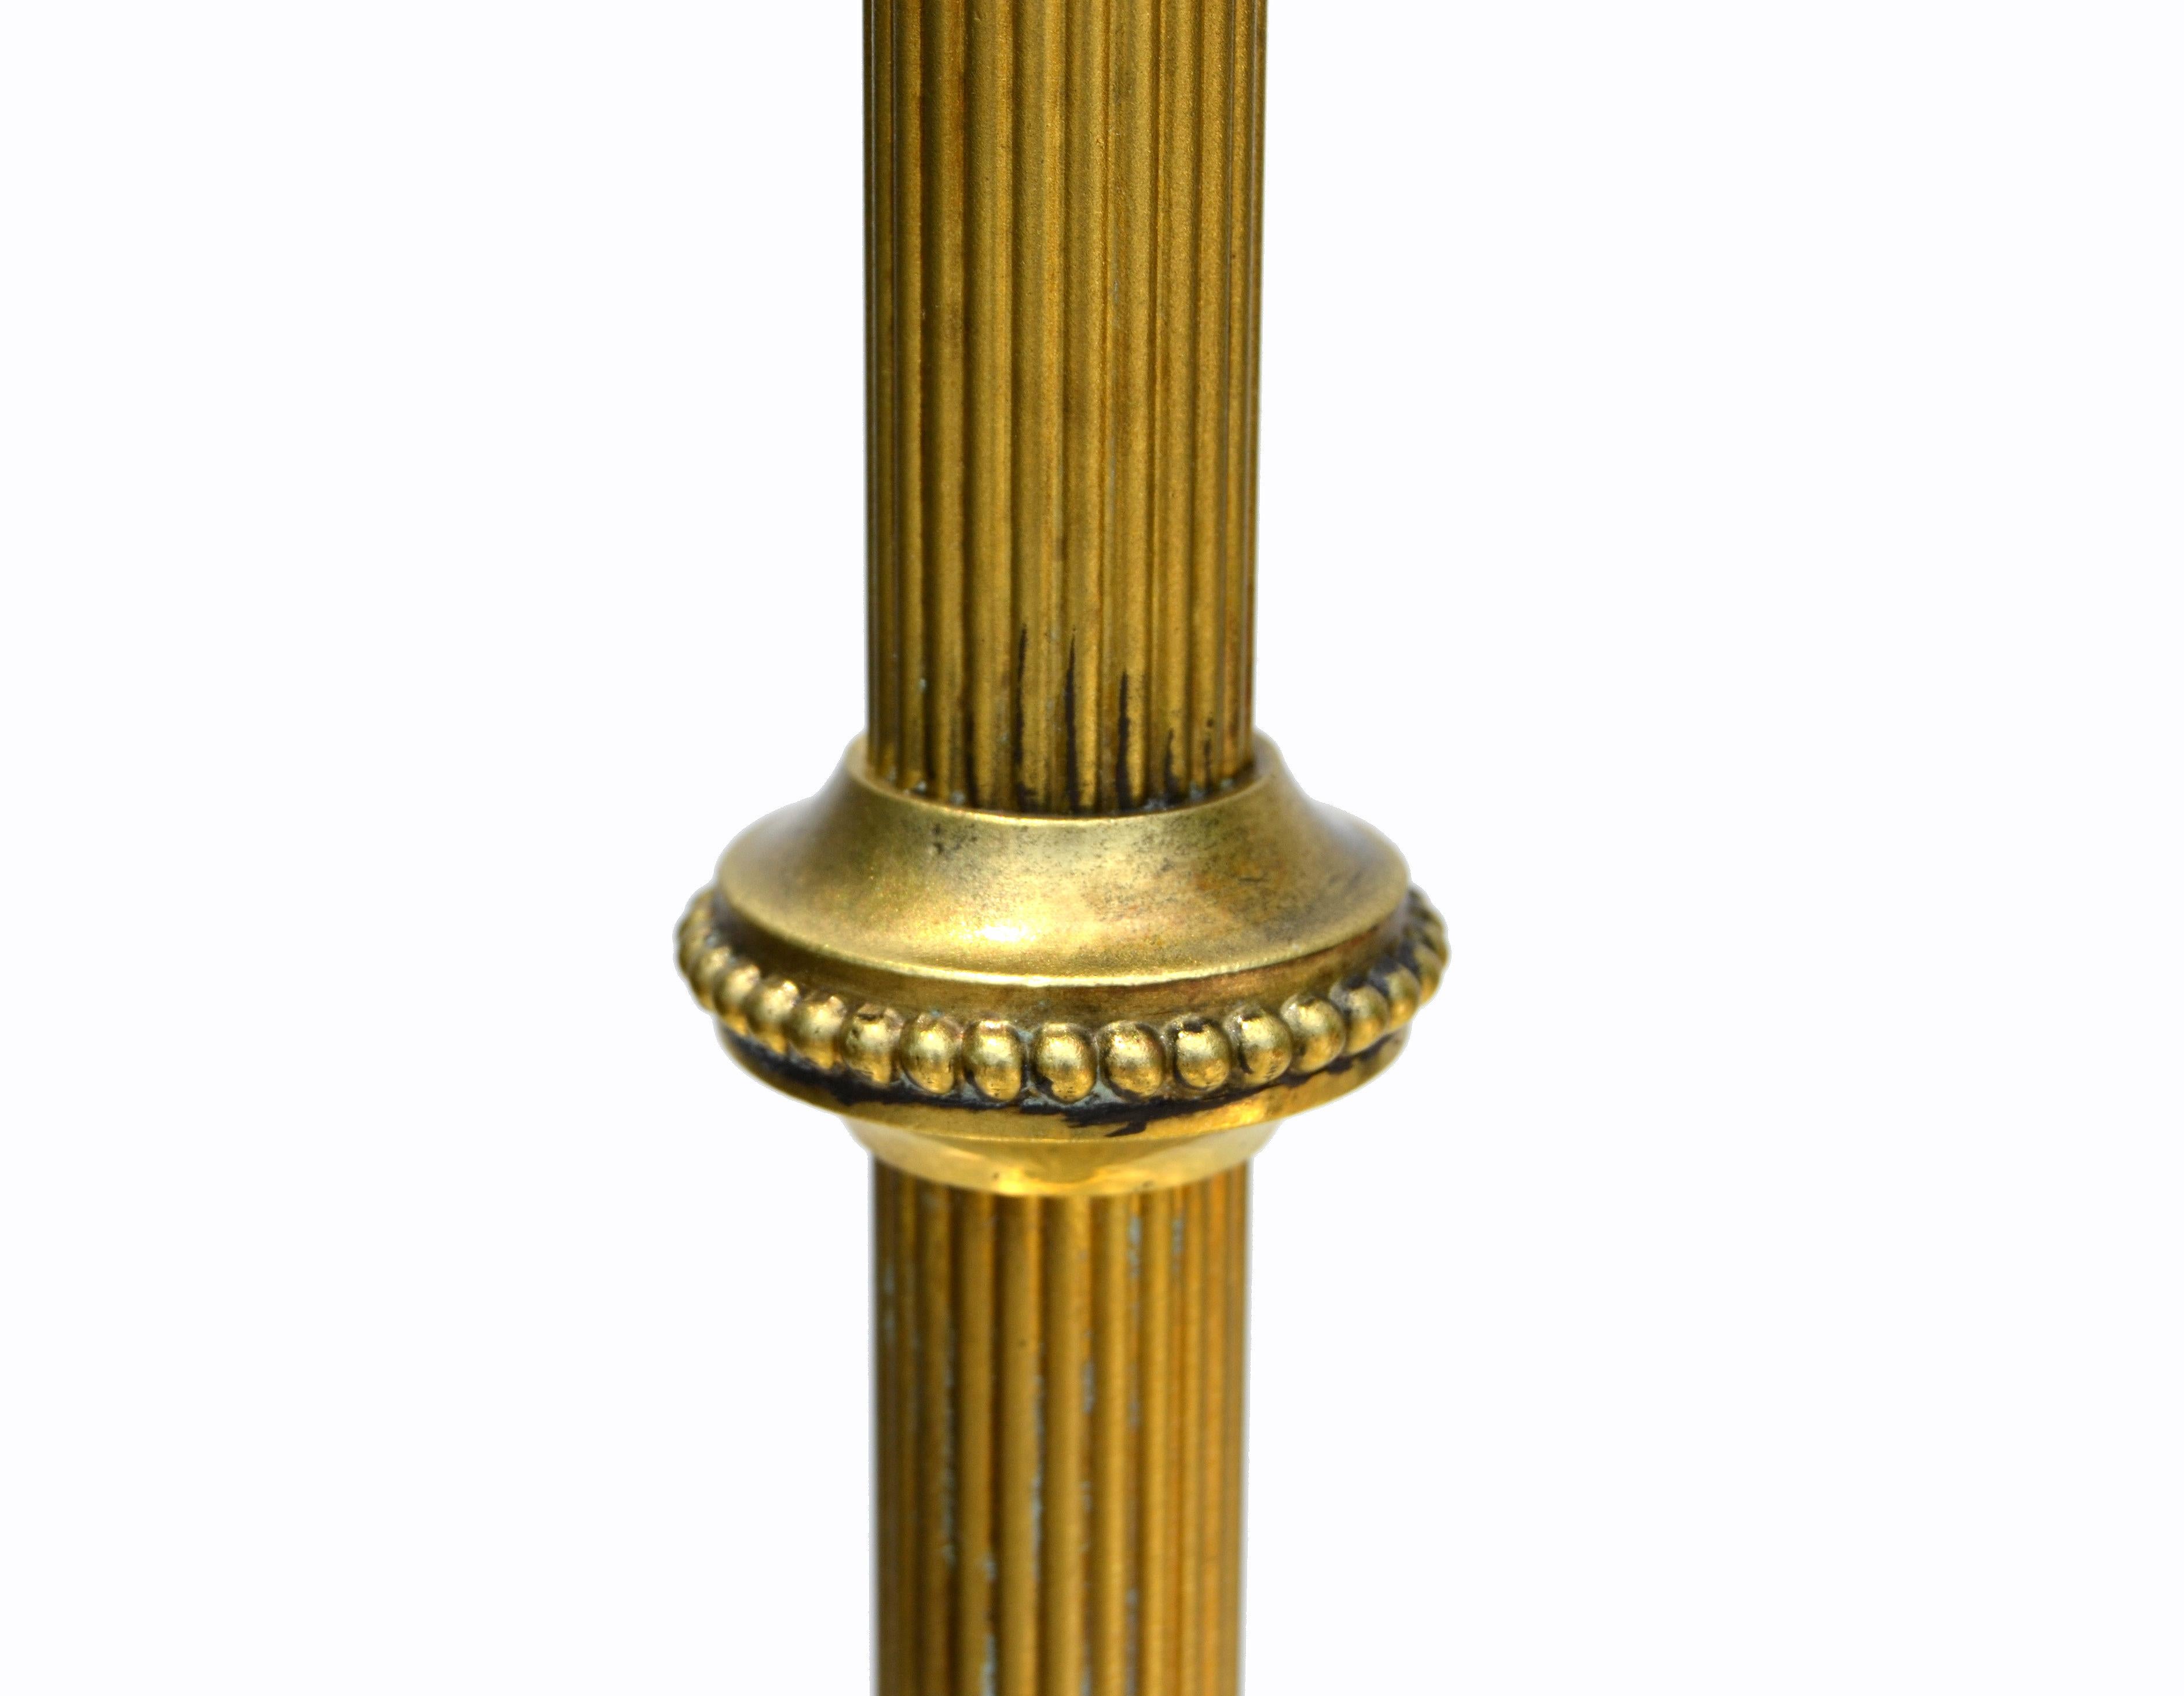 Maison Baguès French Neoclassical Bronze & Brass Round Base Floor Lamp, 1940s For Sale 1